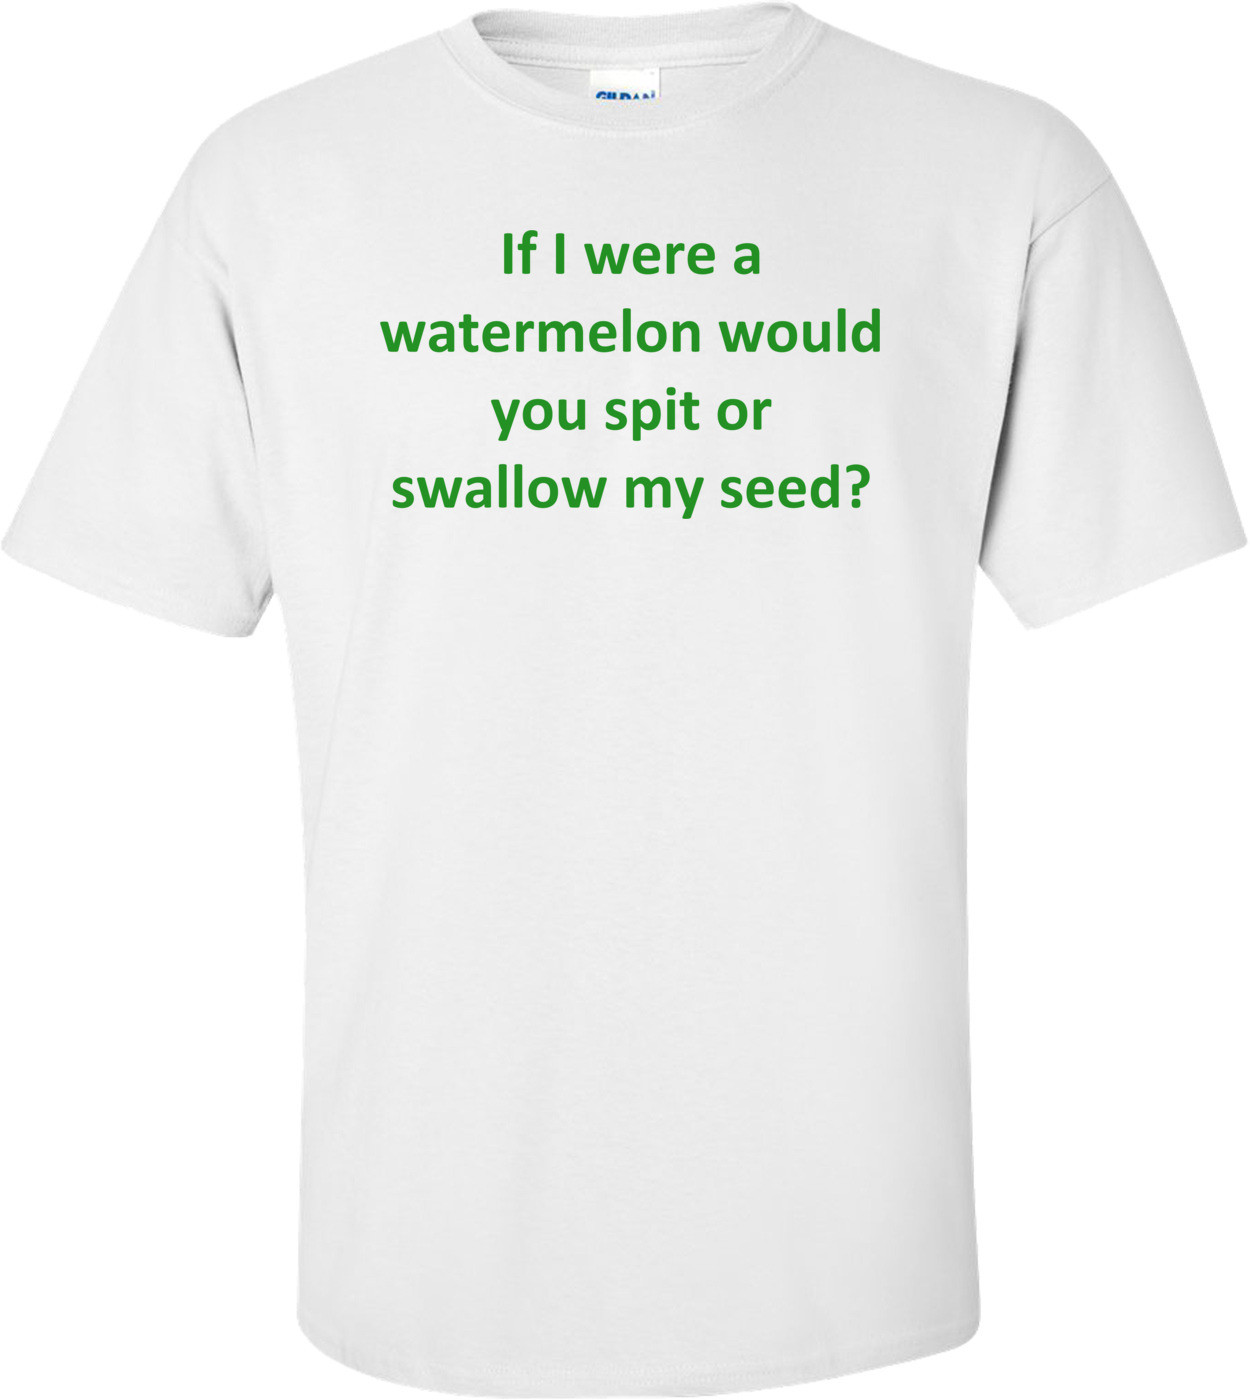 If I were a watermelon would you spit or swallow my seed?